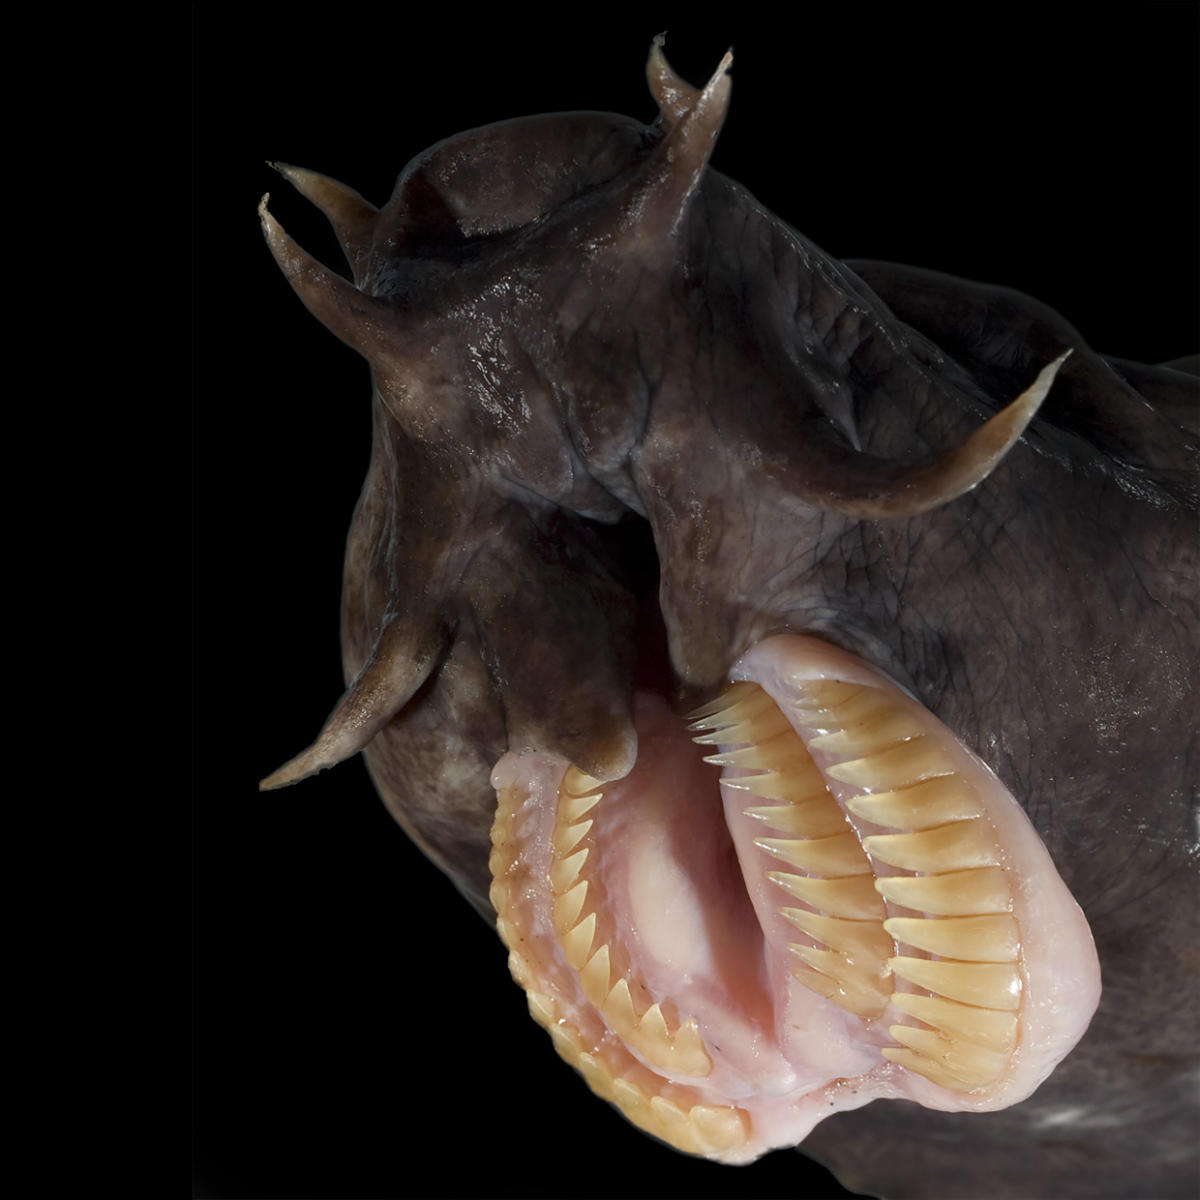 The modern-day hagfish has no eyes, jaws or teeth, and instead uses a spiky tongue-like apparatus to rasp flesh off dead fish and whales at the bottom of the ocean.